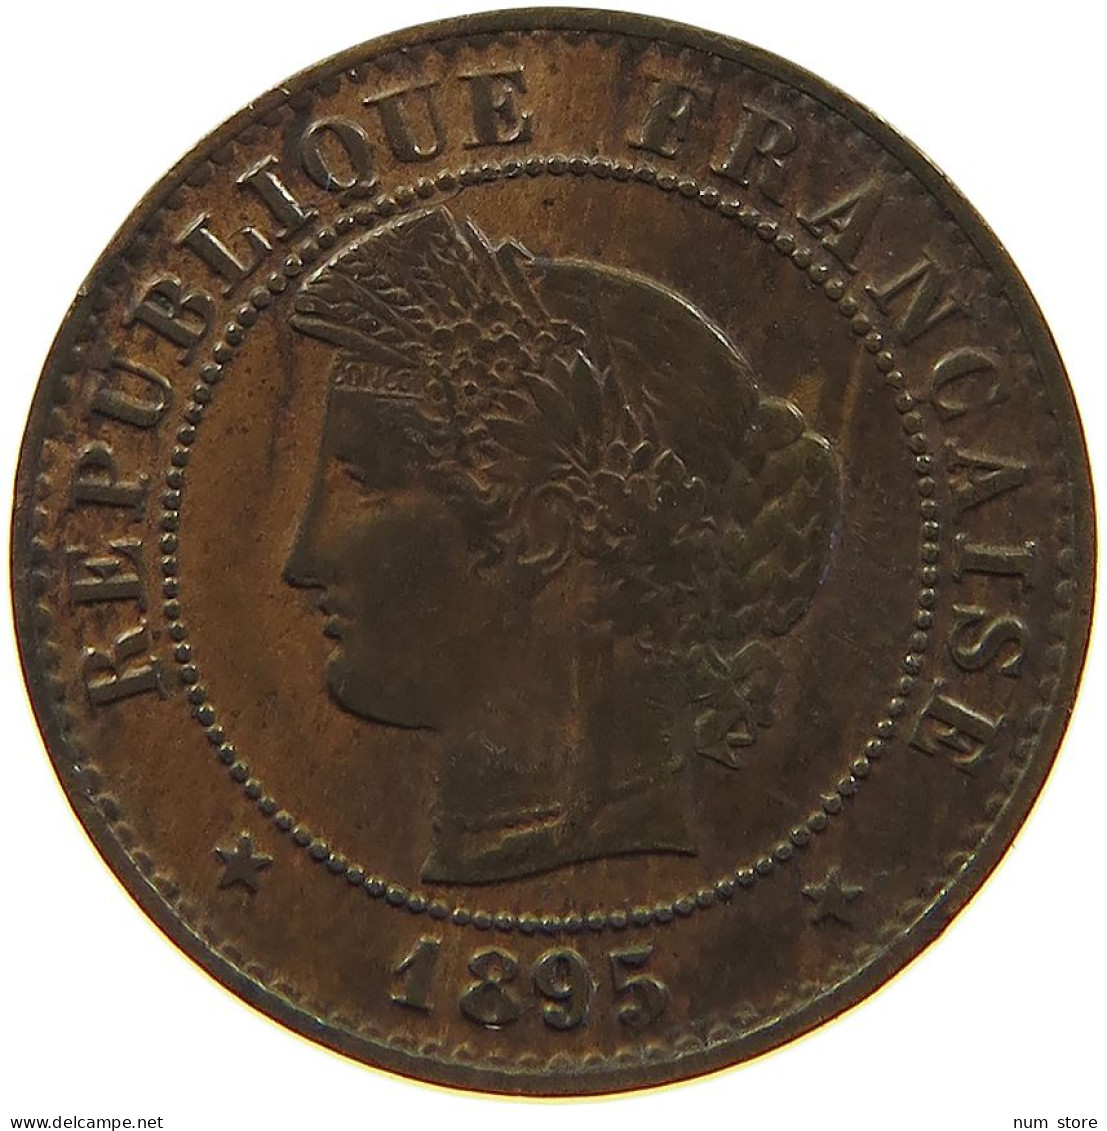 FRANCE CENTIME 1895 A  #s012 0143 - 1 Centime